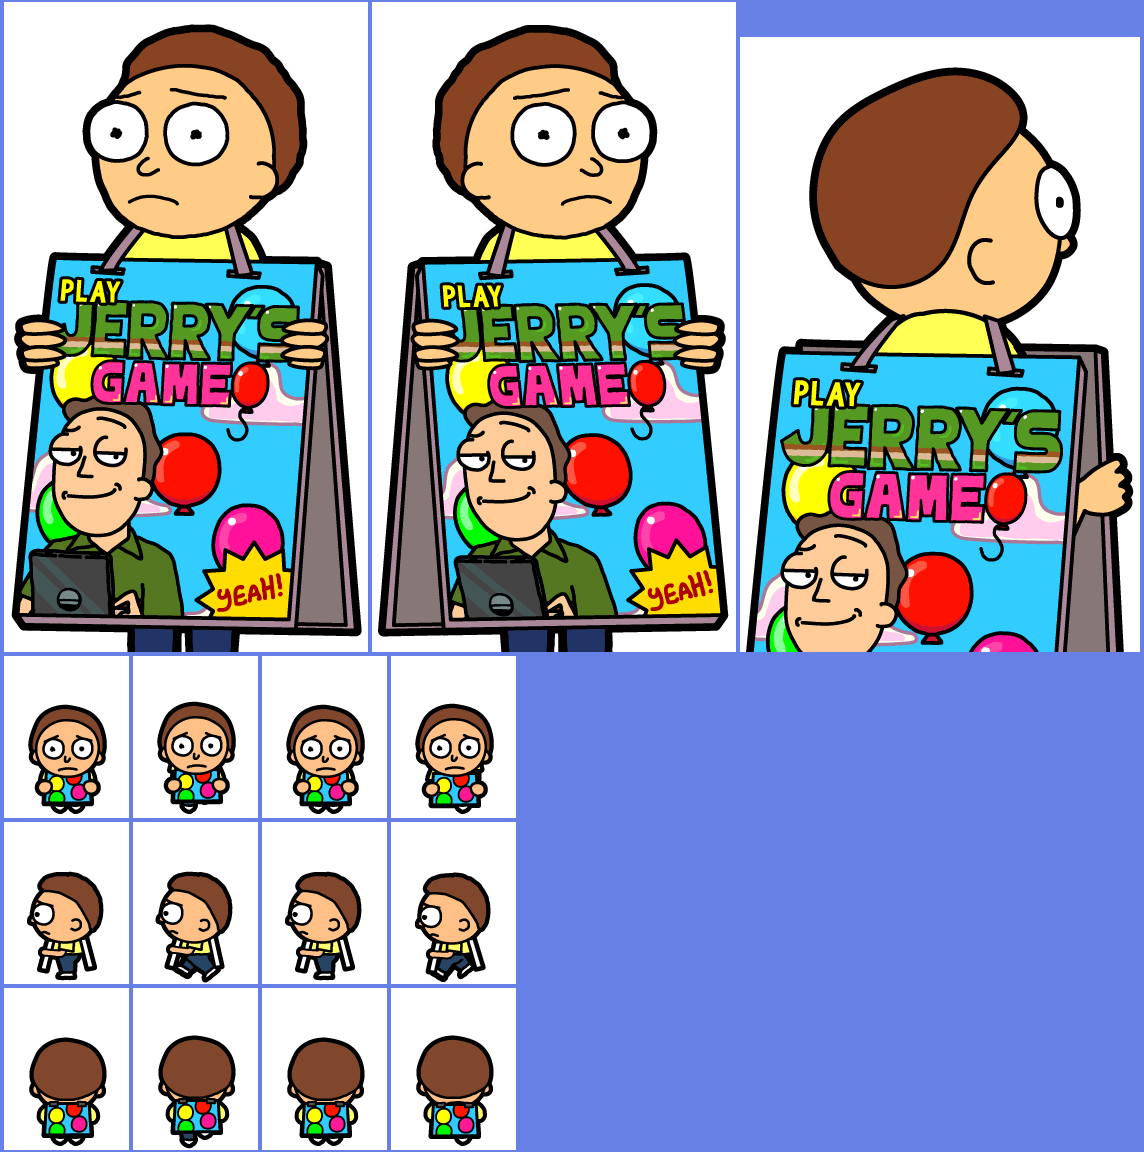 Pocket Mortys - #023 Jerry's Game Morty